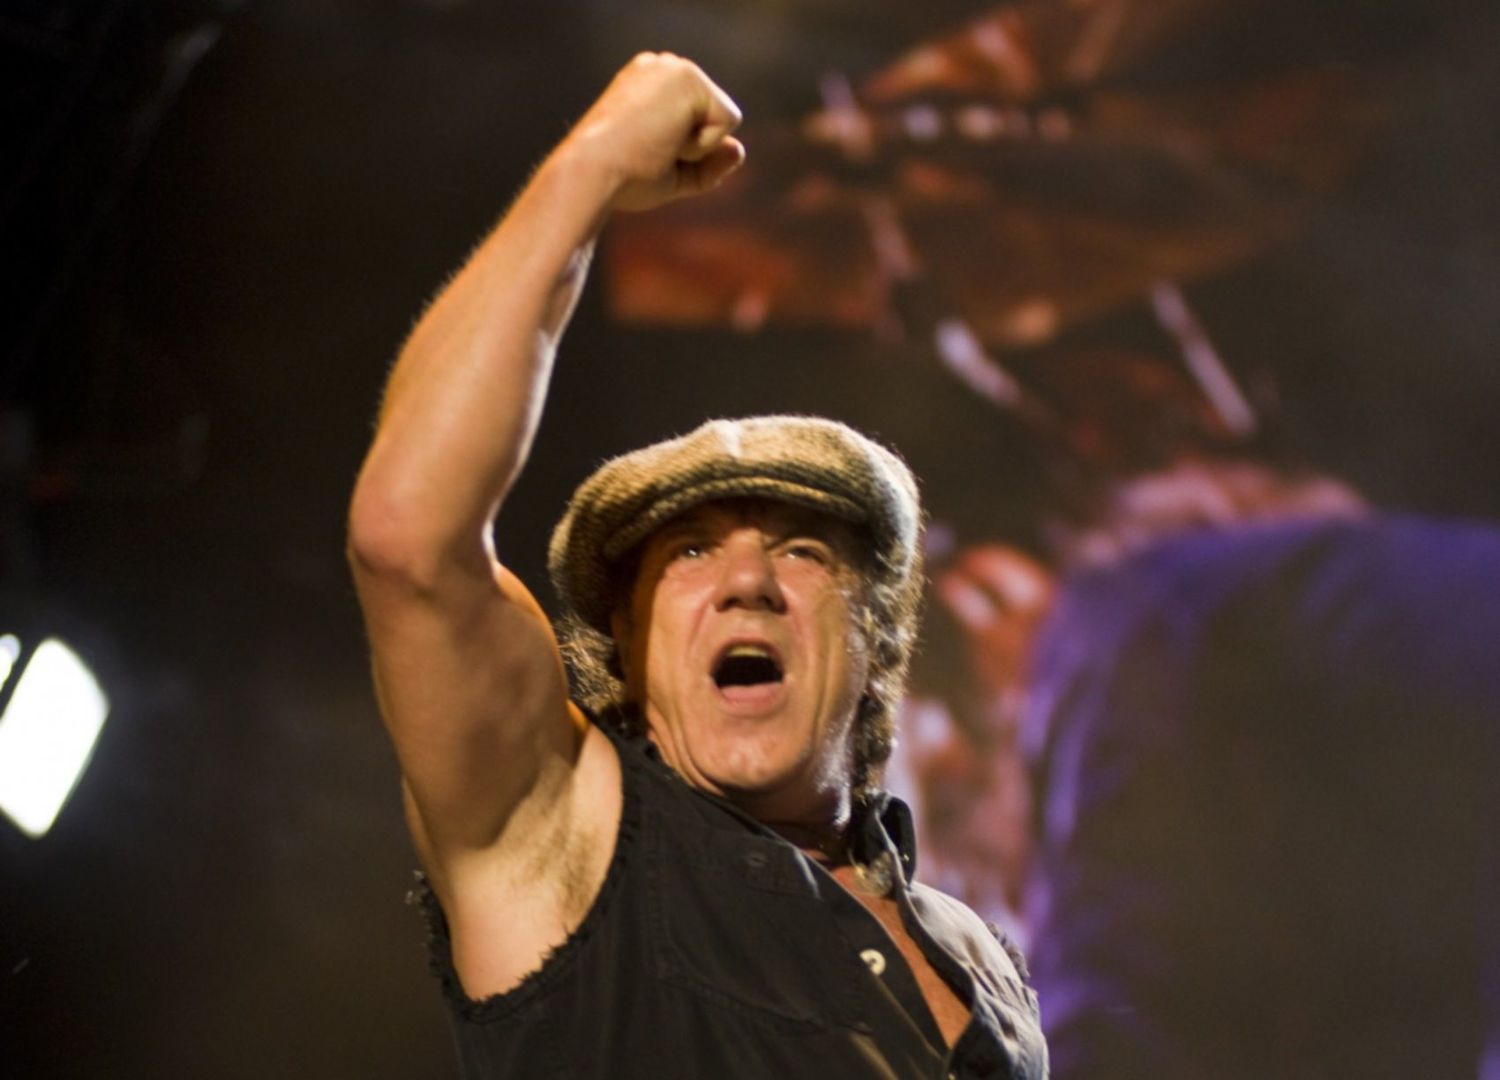 Brian Johnson (ACDC) Live At River Plate @ C. Taylor Crothers